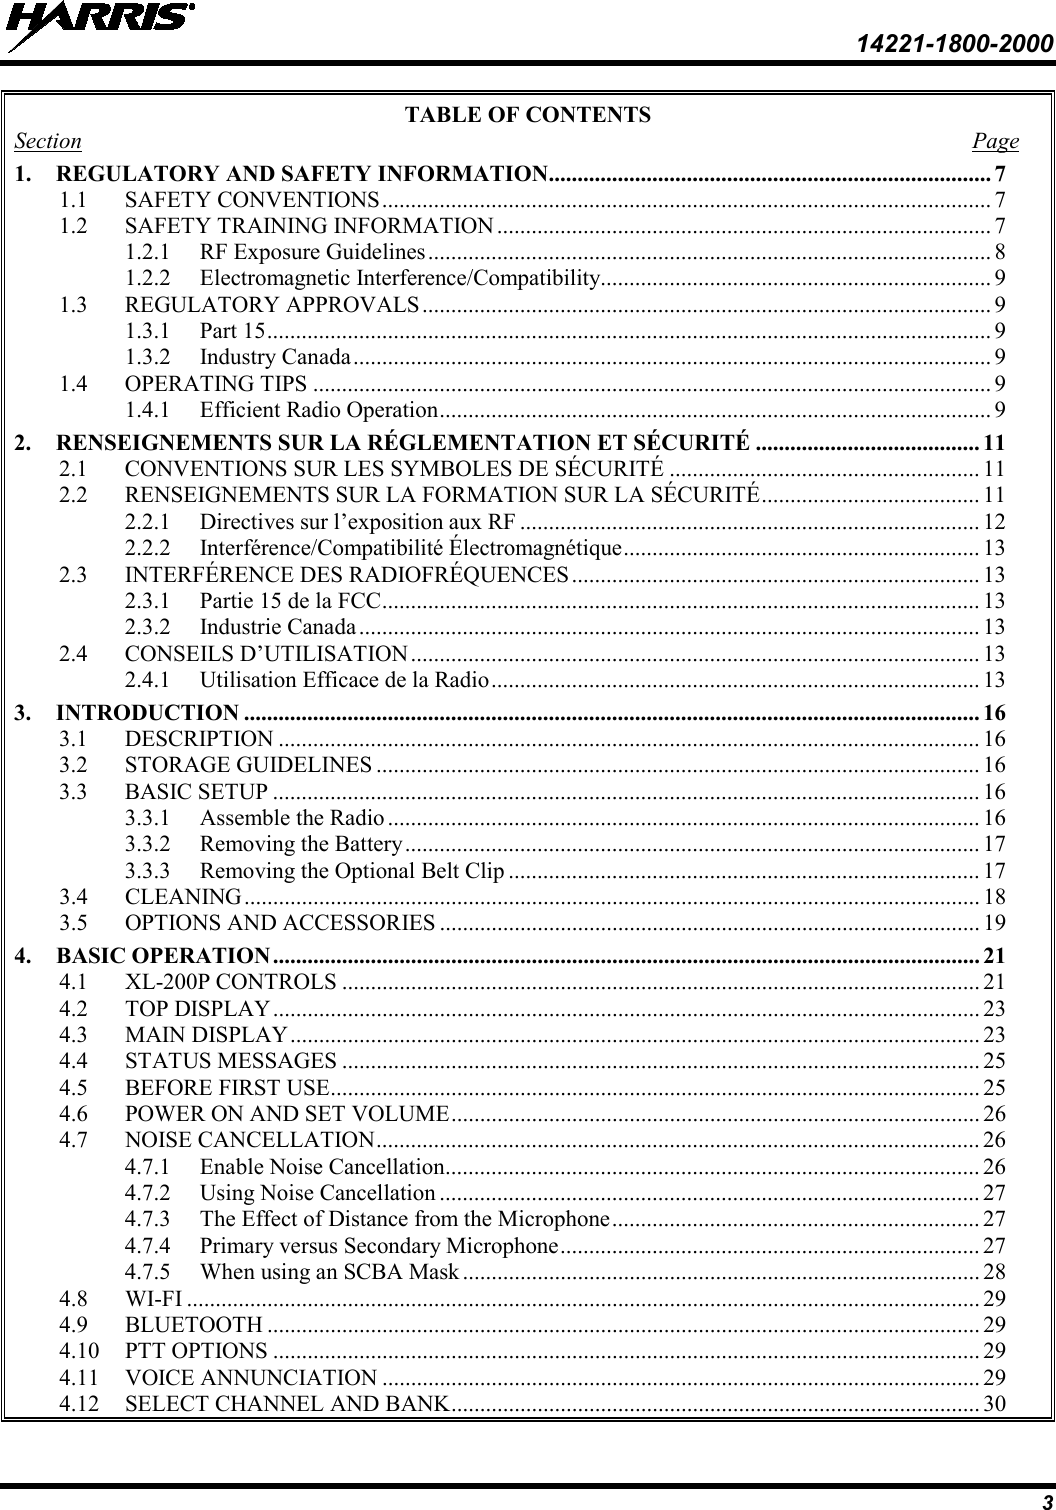  14221-1800-2000 3 TABLE OF CONTENTS Section  Page 1. REGULATORY AND SAFETY INFORMATION ............................................................................. 7 1.1 SAFETY CONVENTIONS .......................................................................................................... 7 1.2 SAFETY TRAINING INFORMATION ...................................................................................... 7 1.2.1 RF Exposure Guidelines .................................................................................................. 8 1.2.2 Electromagnetic Interference/Compatibility .................................................................... 9 1.3 REGULATORY APPROVALS ................................................................................................... 9 1.3.1 Part 15 .............................................................................................................................. 9 1.3.2 Industry Canada ............................................................................................................... 9 1.4 OPERATING TIPS ...................................................................................................................... 9 1.4.1 Efficient Radio Operation ................................................................................................ 9 2. RENSEIGNEMENTS SUR LA RÉGLEMENTATION ET SÉCURITÉ ....................................... 11 2.1 CONVENTIONS SUR LES SYMBOLES DE SÉCURITÉ ...................................................... 11 2.2 RENSEIGNEMENTS SUR LA FORMATION SUR LA SÉCURITÉ ...................................... 11 2.2.1 Directives sur l’exposition aux RF ................................................................................ 12 2.2.2 Interférence/Compatibilité Électromagnétique .............................................................. 13 2.3 INTERFÉRENCE DES RADIOFRÉQUENCES ....................................................................... 13 2.3.1 Partie 15 de la FCC ........................................................................................................ 13 2.3.2 Industrie Canada ............................................................................................................ 13 2.4 CONSEILS D’UTILISATION ................................................................................................... 13 2.4.1 Utilisation Efficace de la Radio ..................................................................................... 13 3. INTRODUCTION ................................................................................................................................ 16 3.1 DESCRIPTION .......................................................................................................................... 16 3.2 STORAGE GUIDELINES ......................................................................................................... 16 3.3 BASIC SETUP ........................................................................................................................... 16 3.3.1 Assemble the Radio ....................................................................................................... 16 3.3.2 Removing the Battery .................................................................................................... 17 3.3.3 Removing the Optional Belt Clip .................................................................................. 17 3.4 CLEANING ................................................................................................................................ 18 3.5 OPTIONS AND ACCESSORIES .............................................................................................. 19 4. BASIC OPERATION ........................................................................................................................... 21 4.1 XL-200P CONTROLS ............................................................................................................... 21 4.2 TOP DISPLAY ........................................................................................................................... 23 4.3 MAIN DISPLAY ........................................................................................................................ 23 4.4 STATUS MESSAGES ............................................................................................................... 25 4.5 BEFORE FIRST USE ................................................................................................................. 25 4.6 POWER ON AND SET VOLUME ............................................................................................ 26 4.7 NOISE CANCELLATION ......................................................................................................... 26 4.7.1 Enable Noise Cancellation ............................................................................................. 26 4.7.2 Using Noise Cancellation .............................................................................................. 27 4.7.3 The Effect of Distance from the Microphone ................................................................ 27 4.7.4 Primary versus Secondary Microphone ......................................................................... 27 4.7.5 When using an SCBA Mask .......................................................................................... 28 4.8 WI-FI .......................................................................................................................................... 29 4.9 BLUETOOTH ............................................................................................................................ 29 4.10 PTT OPTIONS ........................................................................................................................... 29 4.11 VOICE ANNUNCIATION ........................................................................................................ 29 4.12 SELECT CHANNEL AND BANK ............................................................................................ 30 